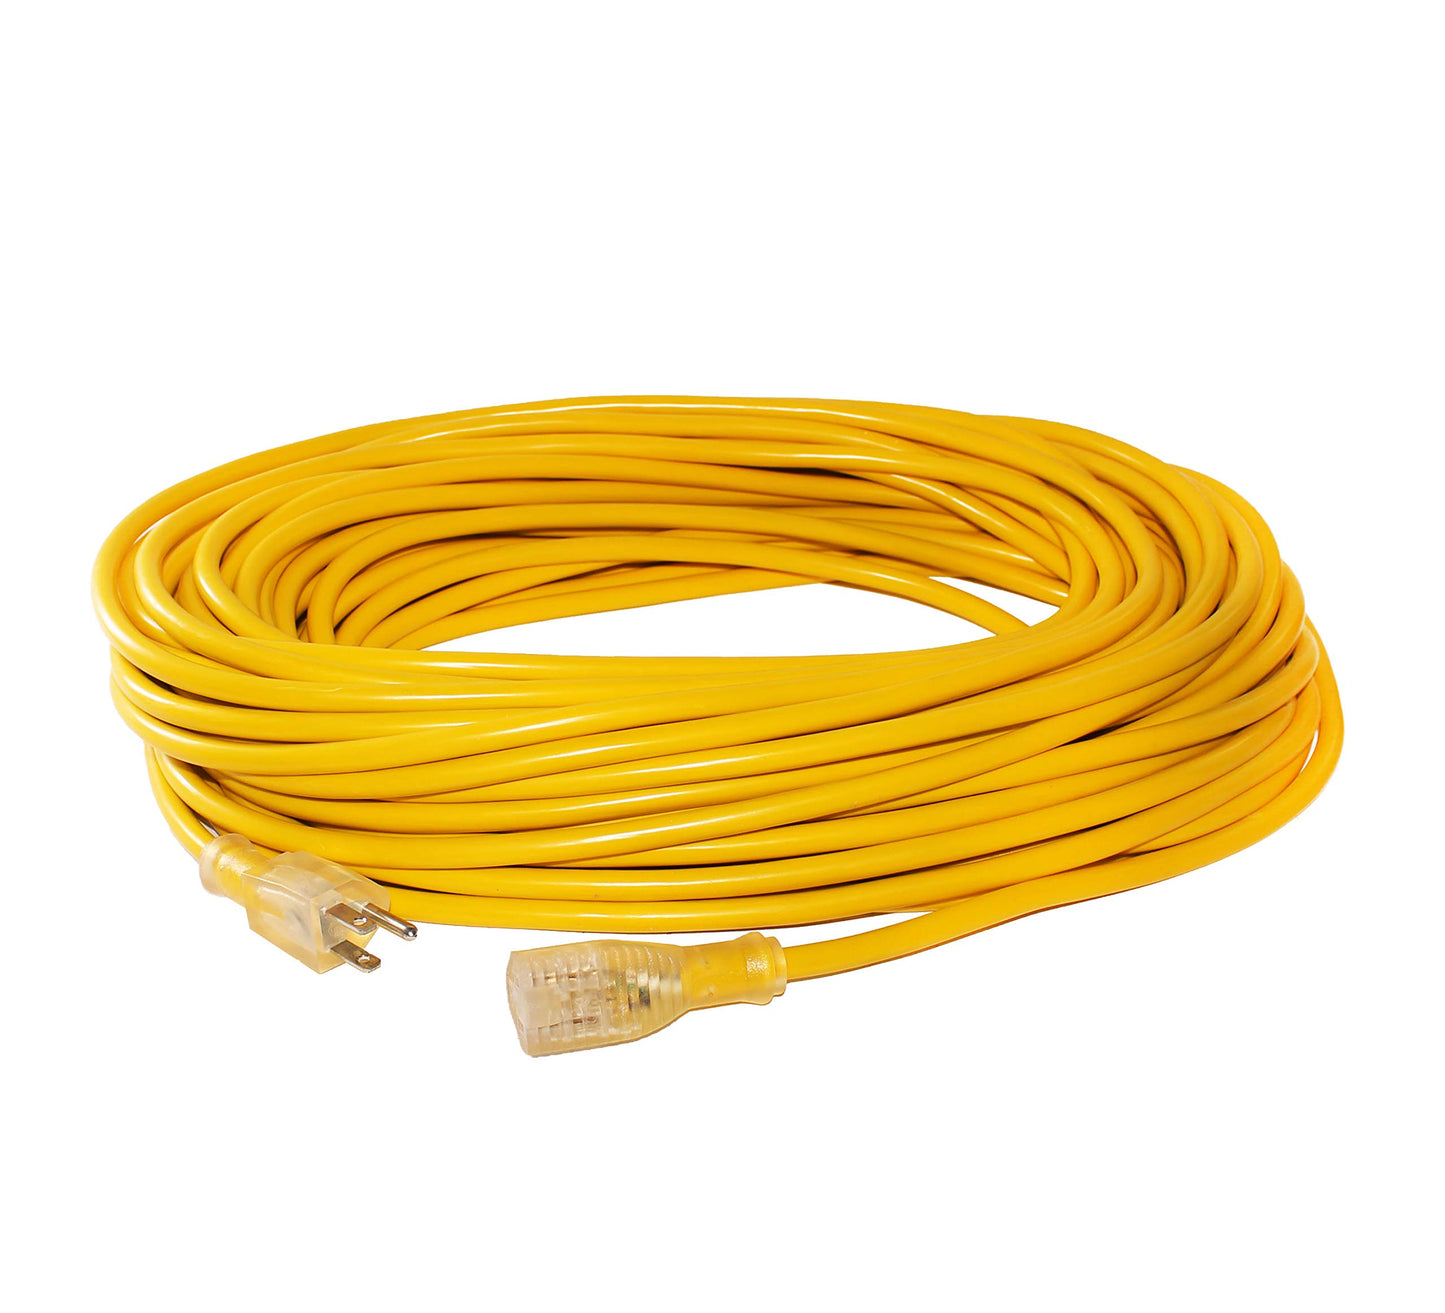 100 ft Power Extension Cord Outdoor & Indoor Heavy Duty 12 Gauge/3 Prong SJTW (Yellow) Lighted end Extra Durability 15 AMP 125 Volts 1875 Watts by LifeSupplyUSA 100 Feet Yellow